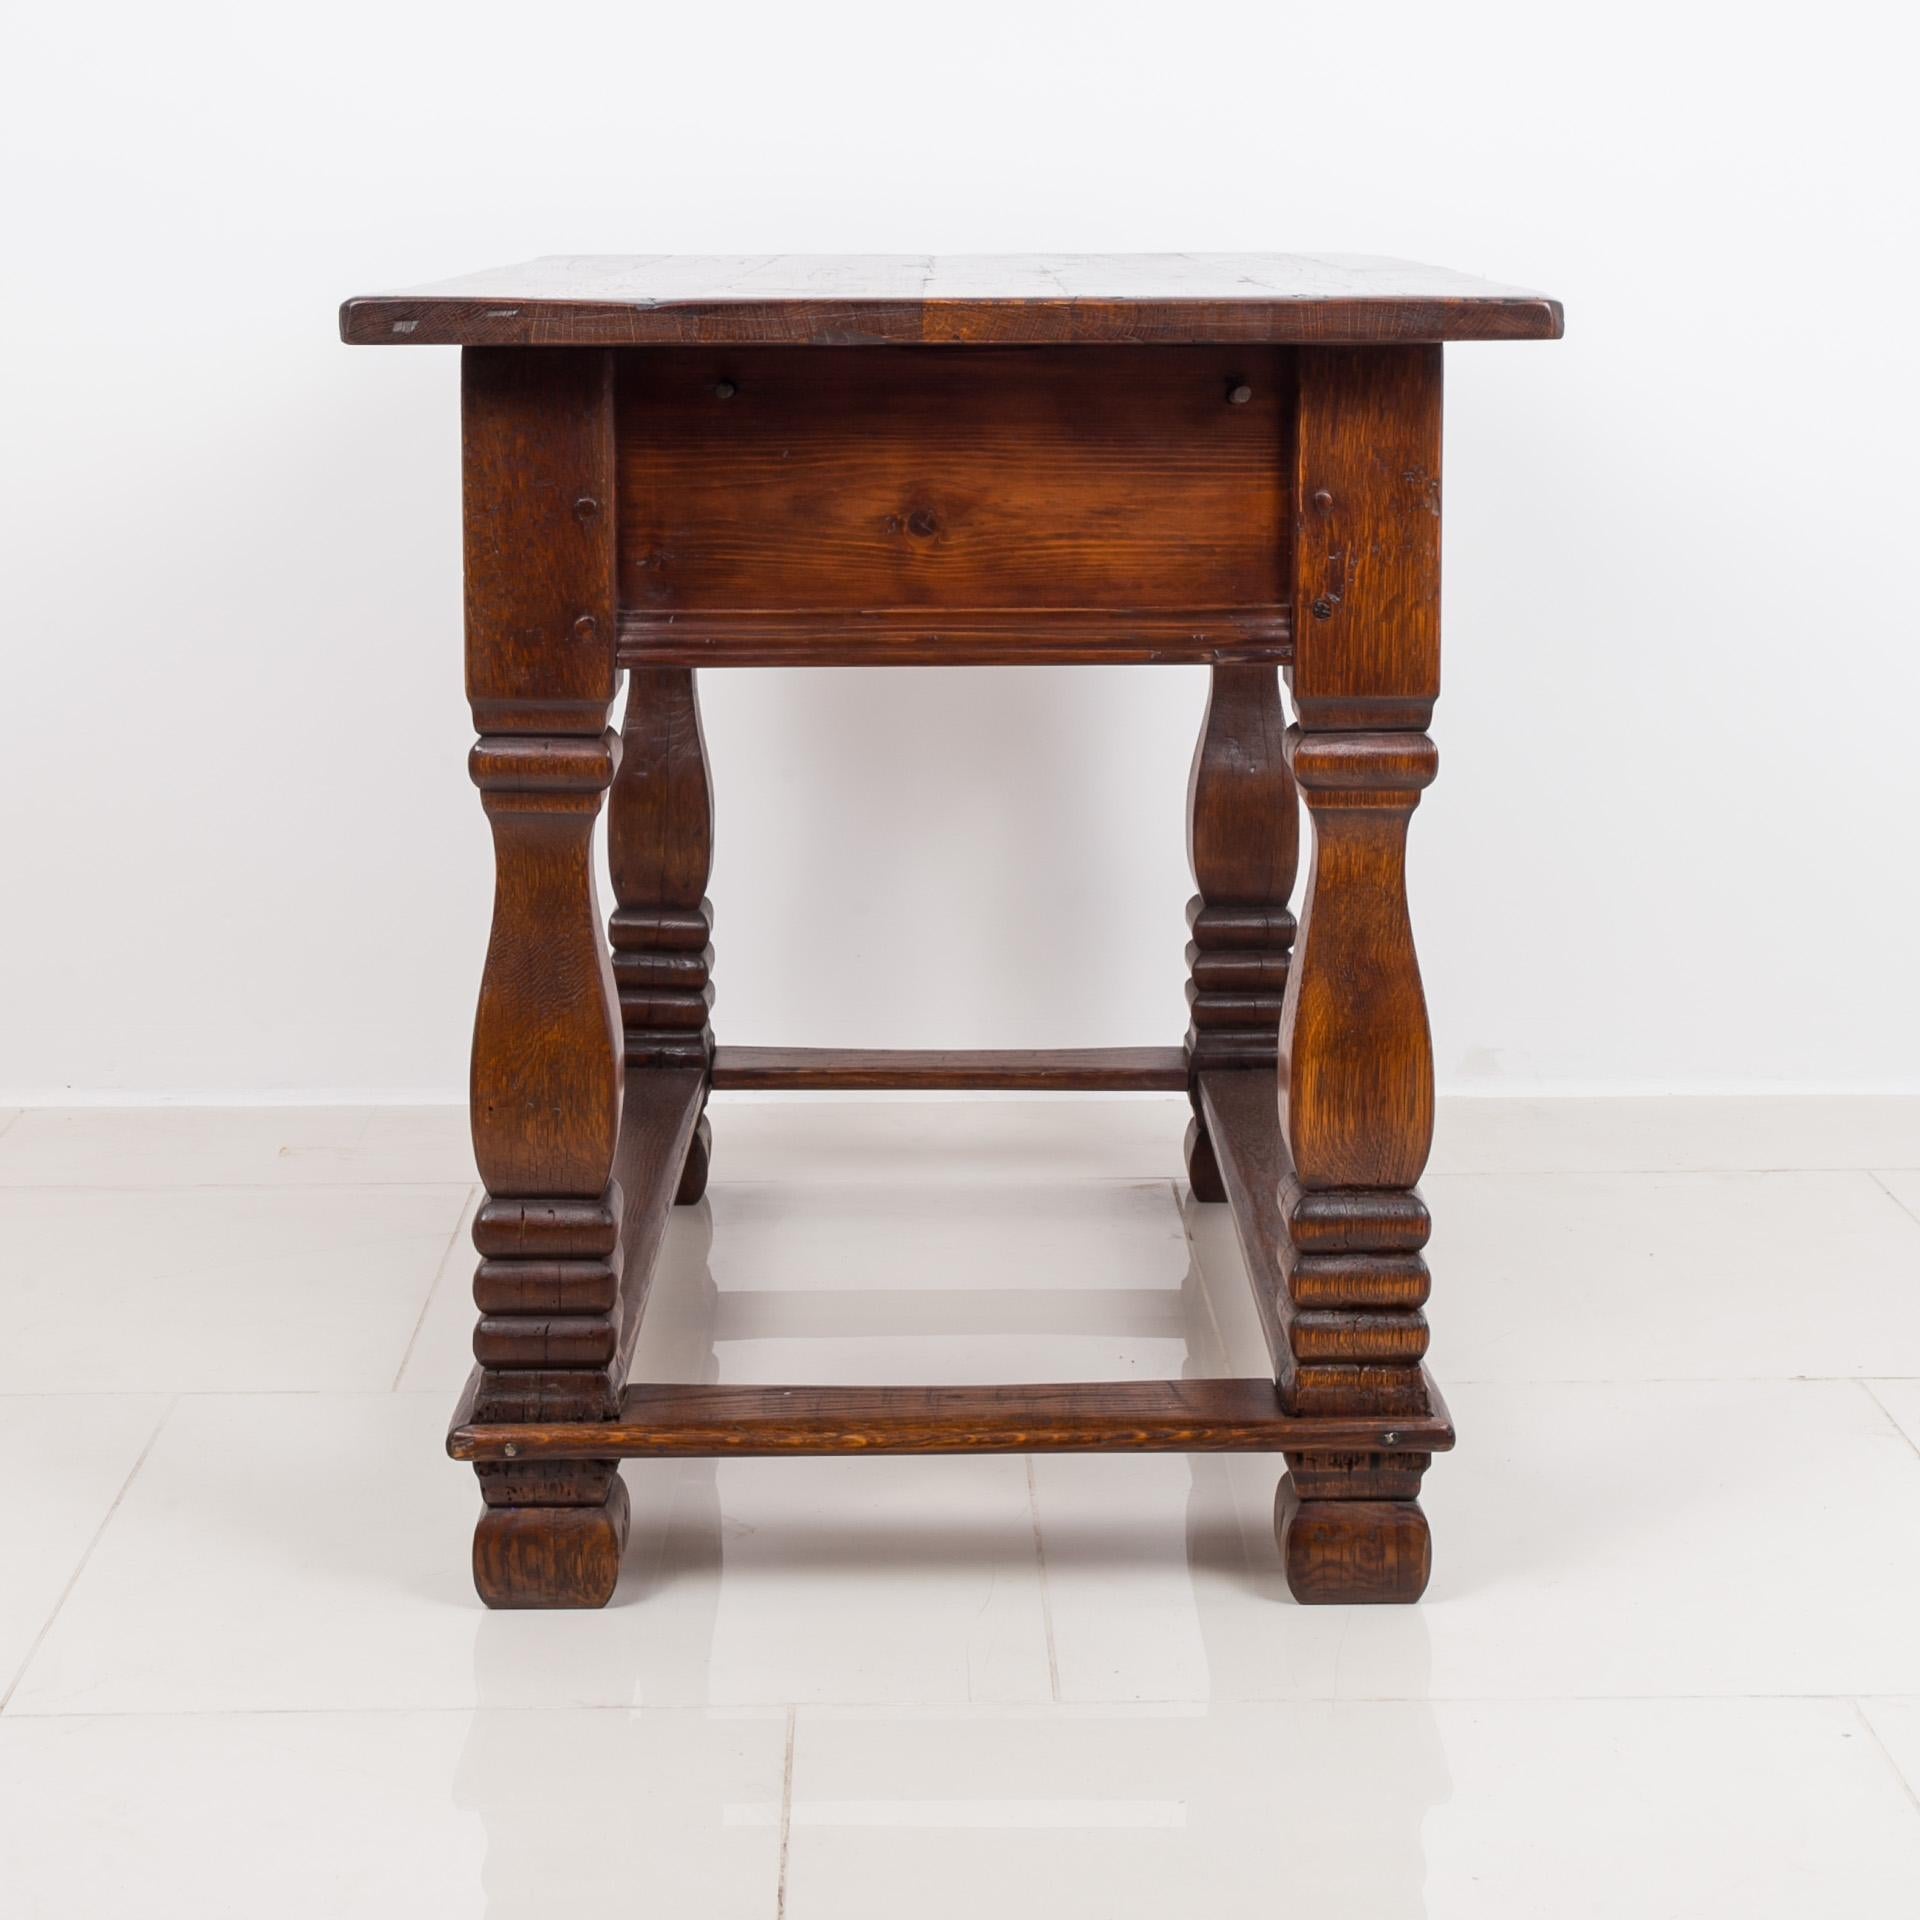 Solid Oak Table, 18th / 19th Century, Rustic Style, Prep or Dining Table 1